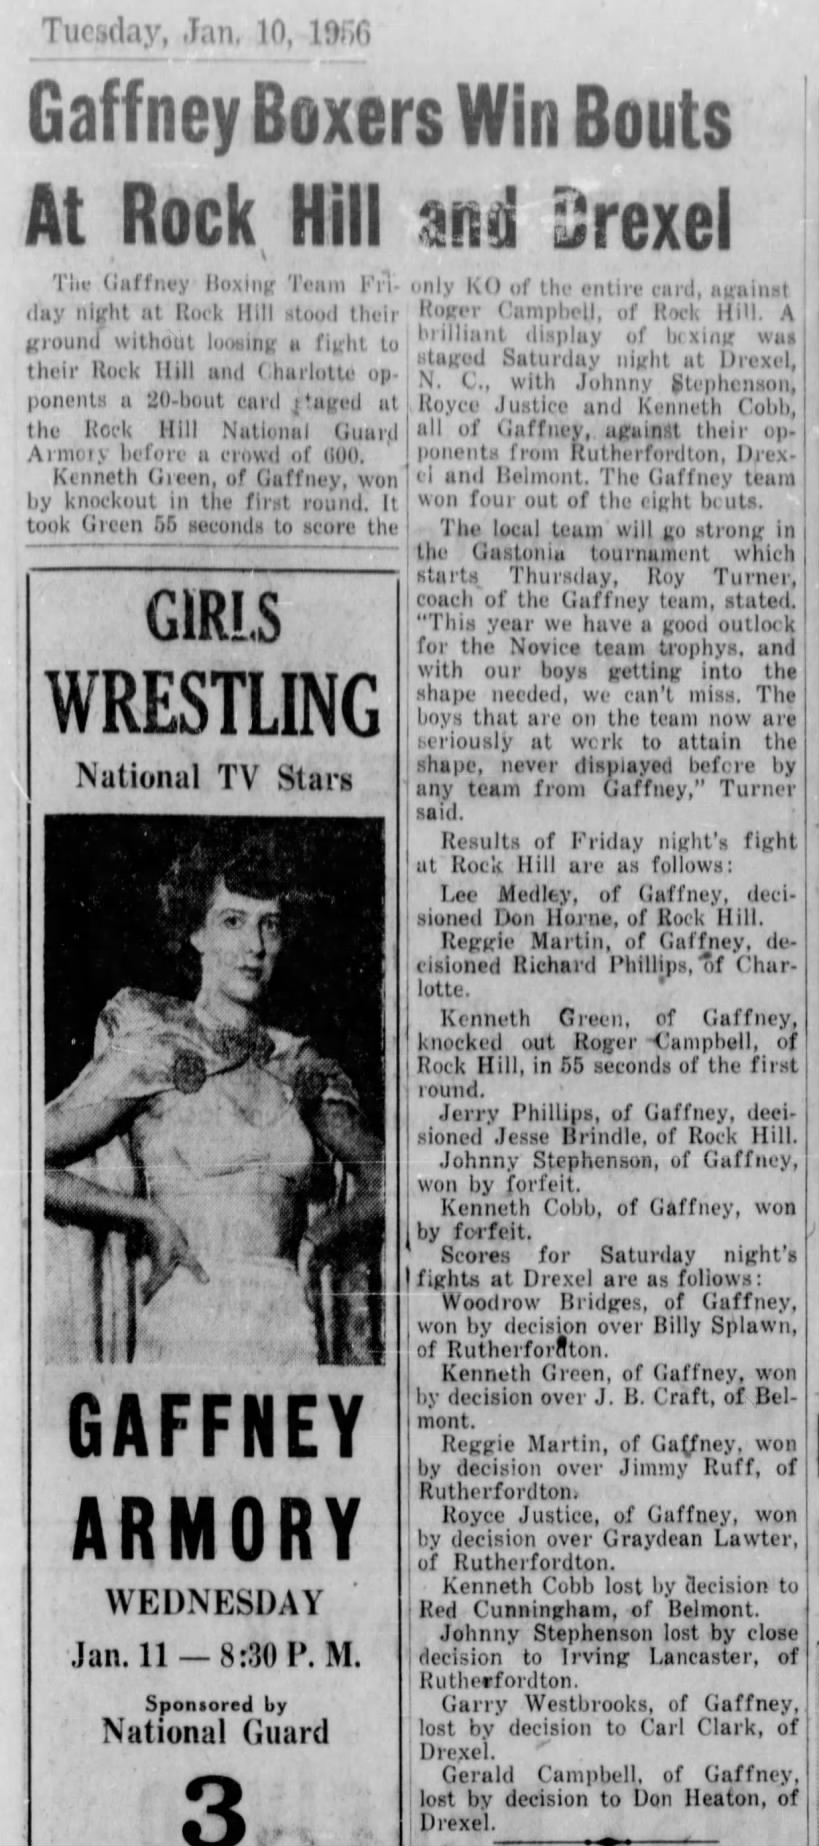 Jan 10, 1956 Gaffney boxers win at Rock Hill and Drexel.